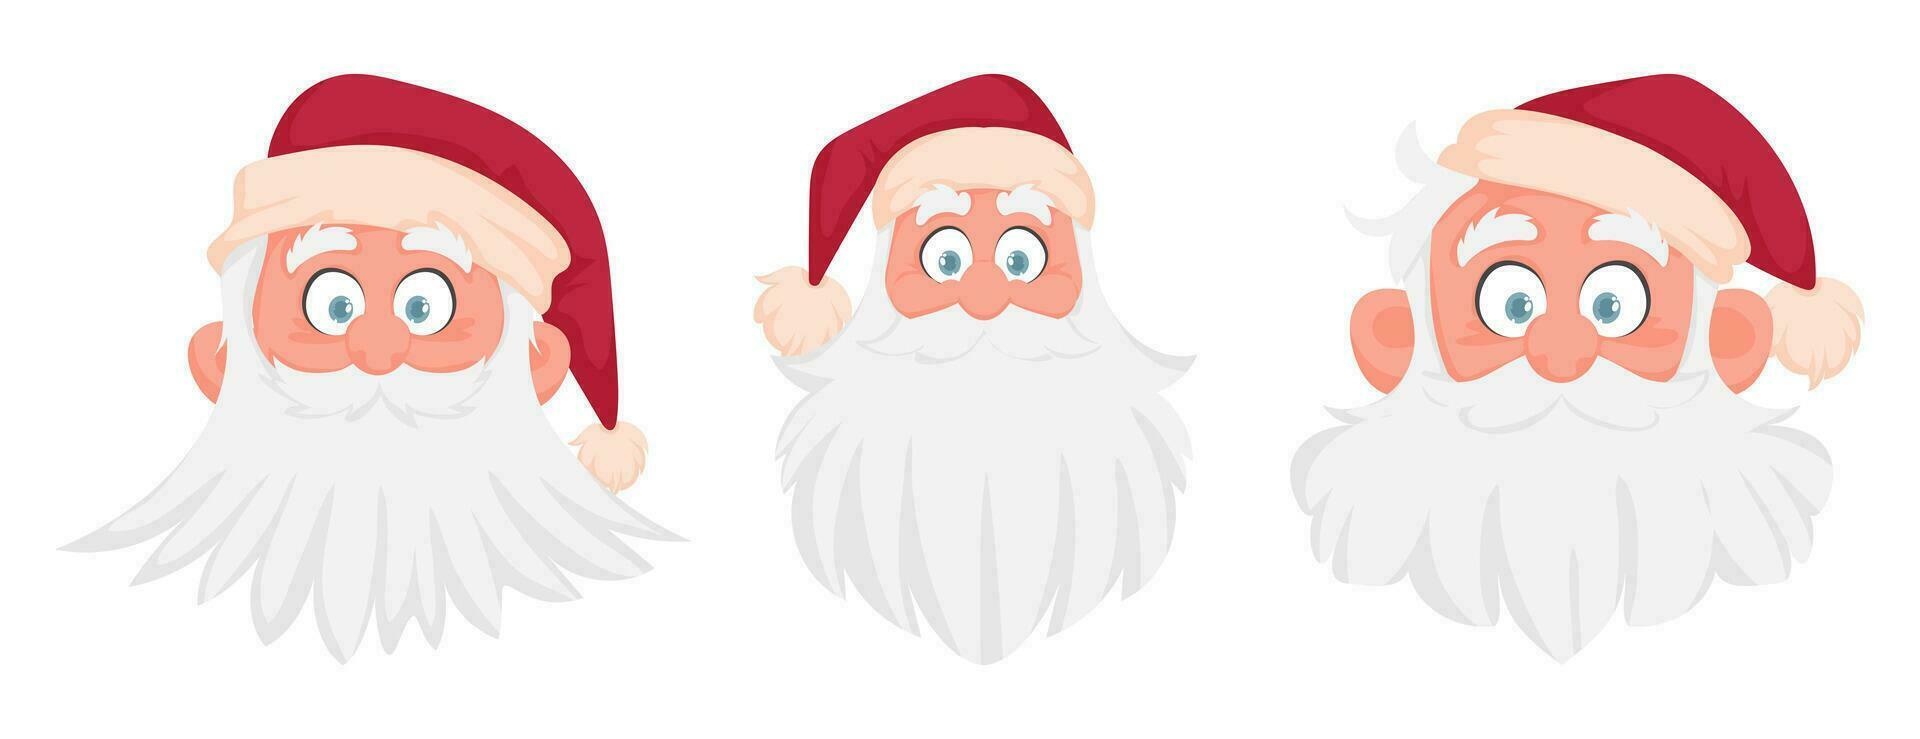 Set of different kind Santa Claus faces. Cartoon style vector